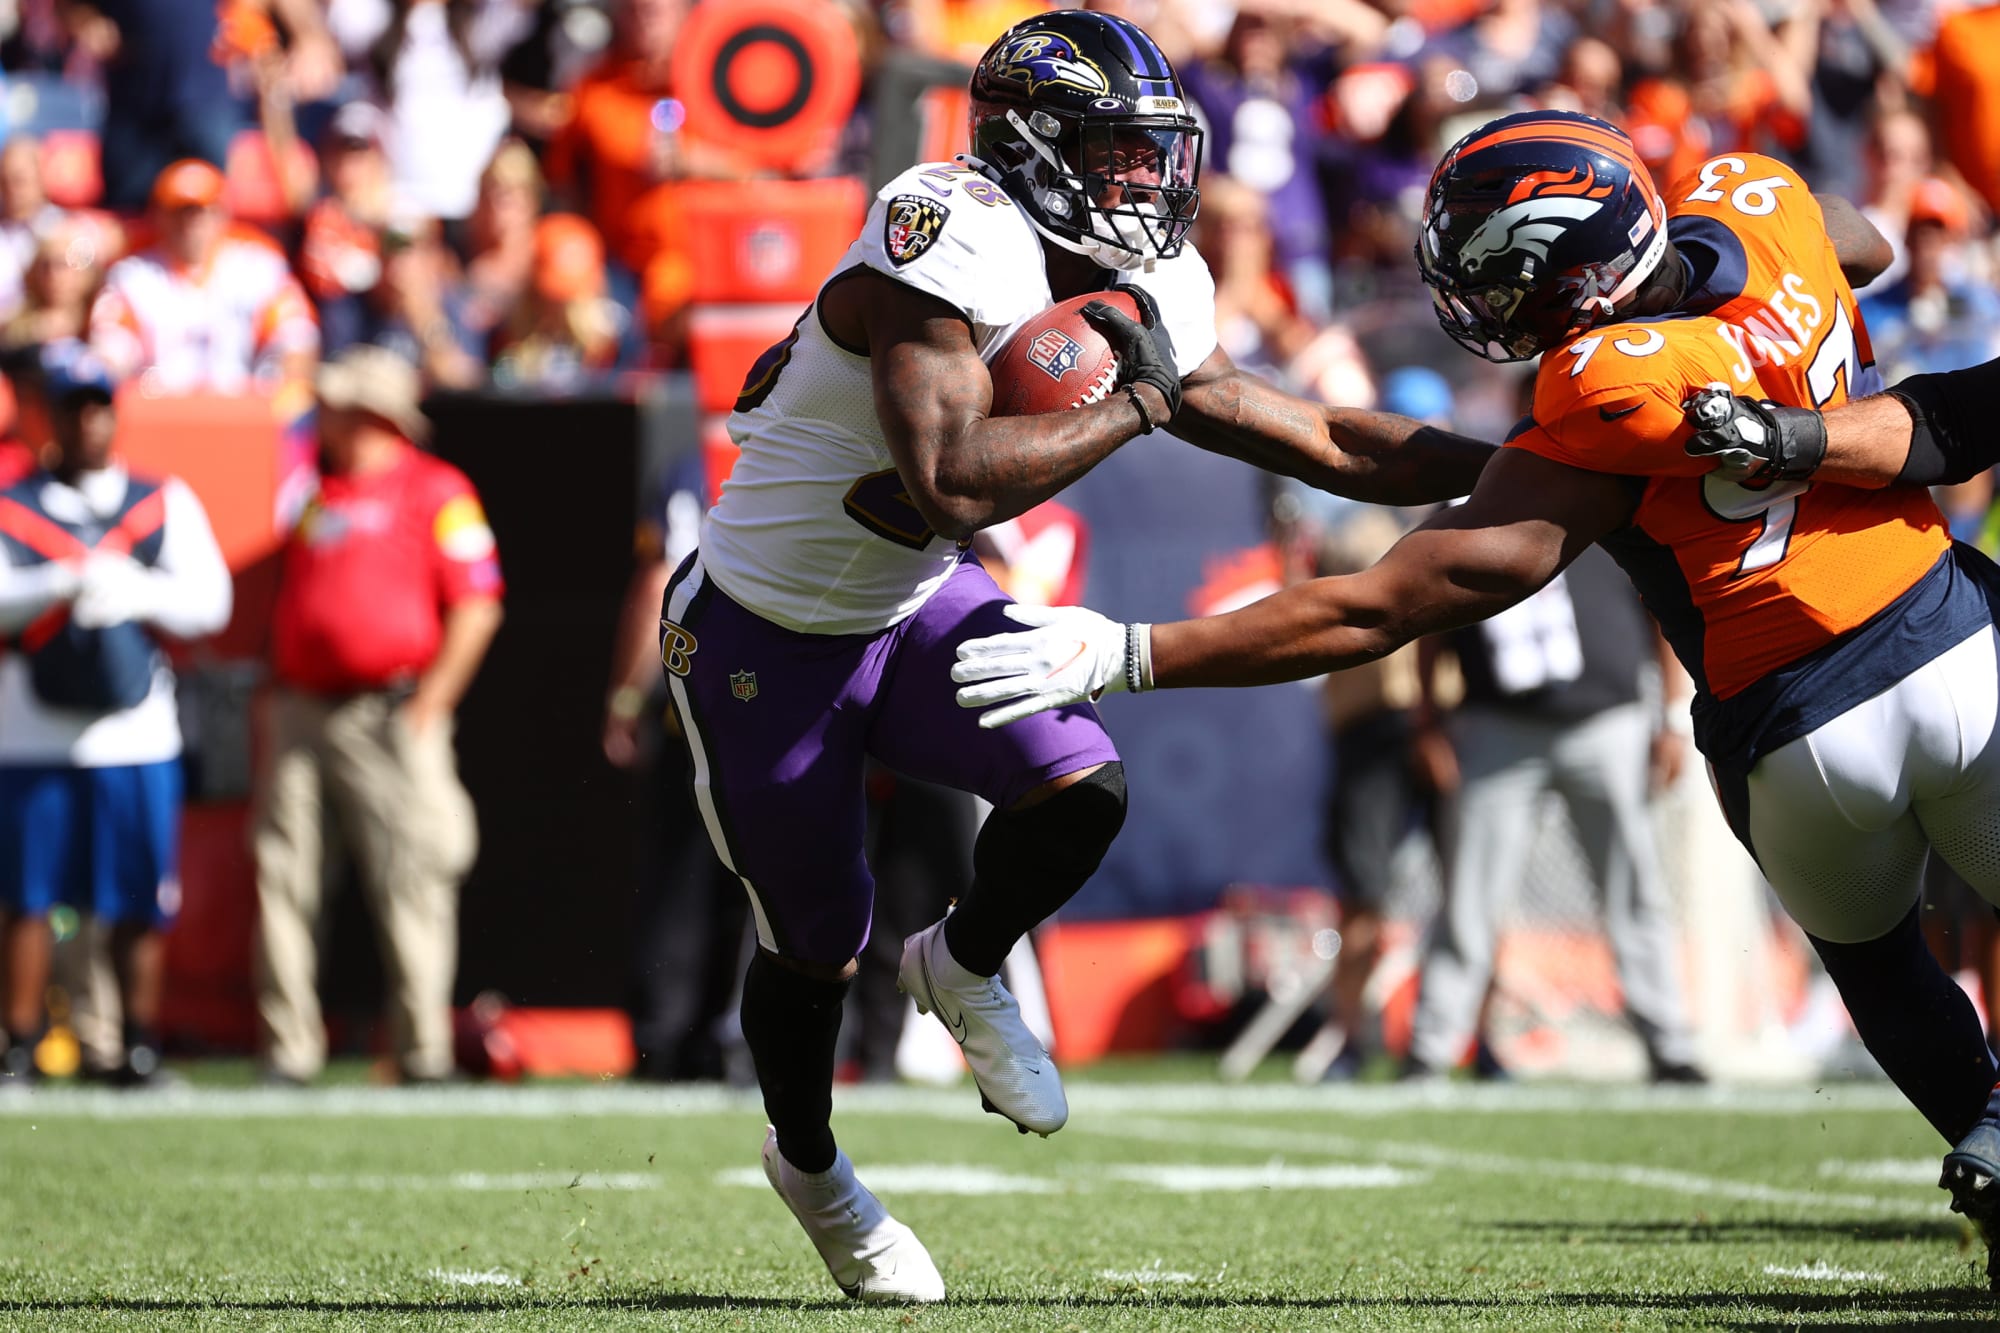 Ravens receiving trade offers for their running backs, per report